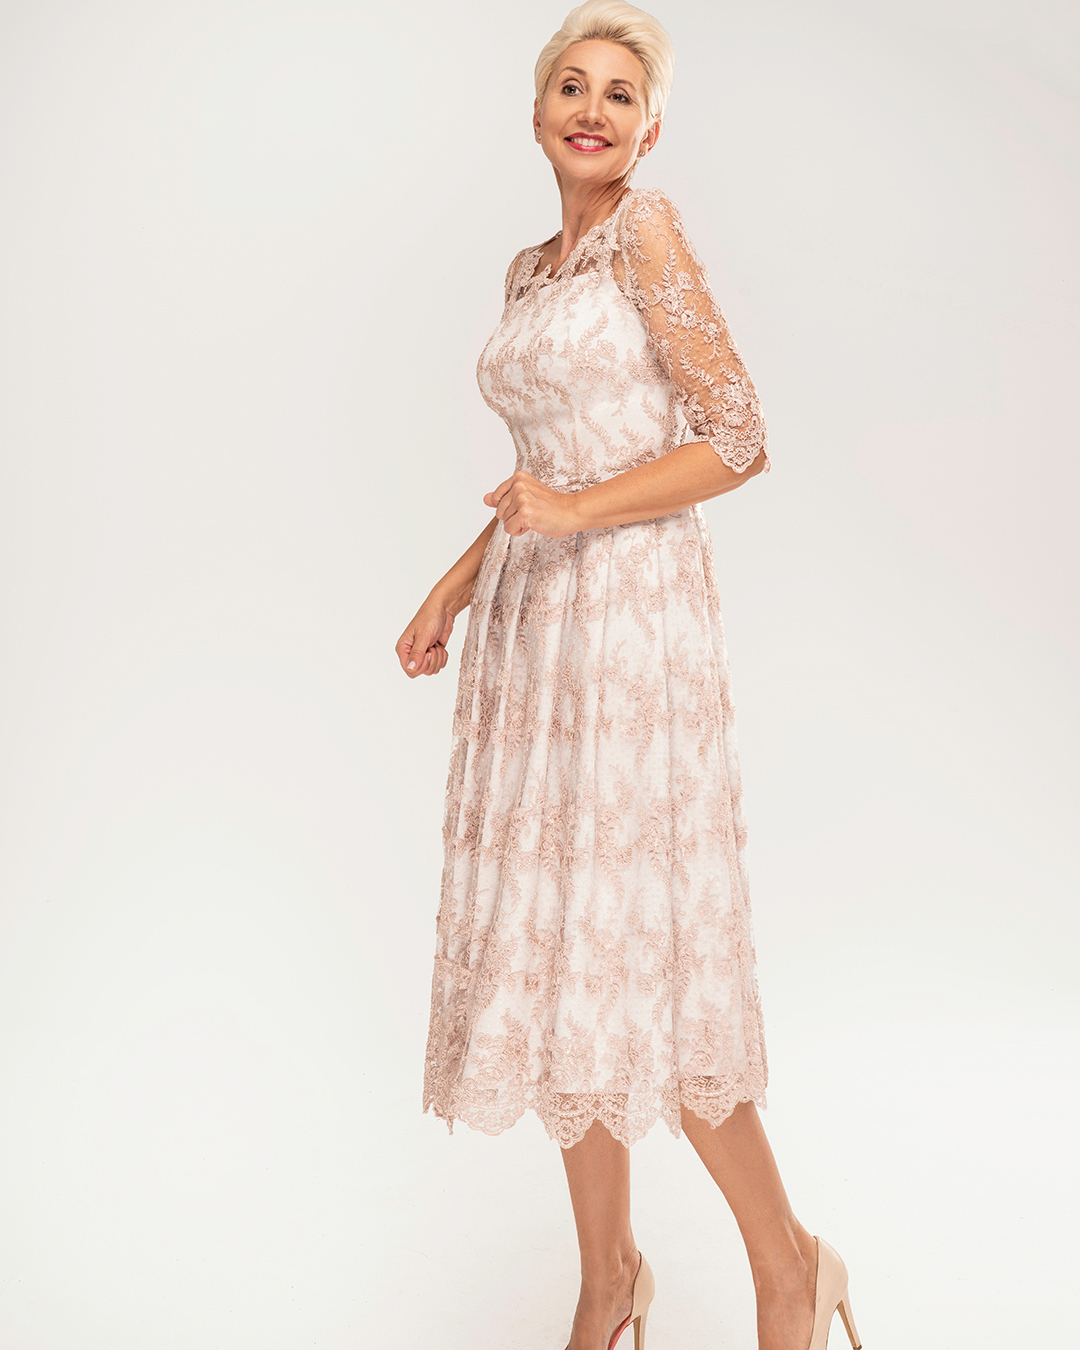 mother of the bride dresses lace with sleeves tea length shutterstock